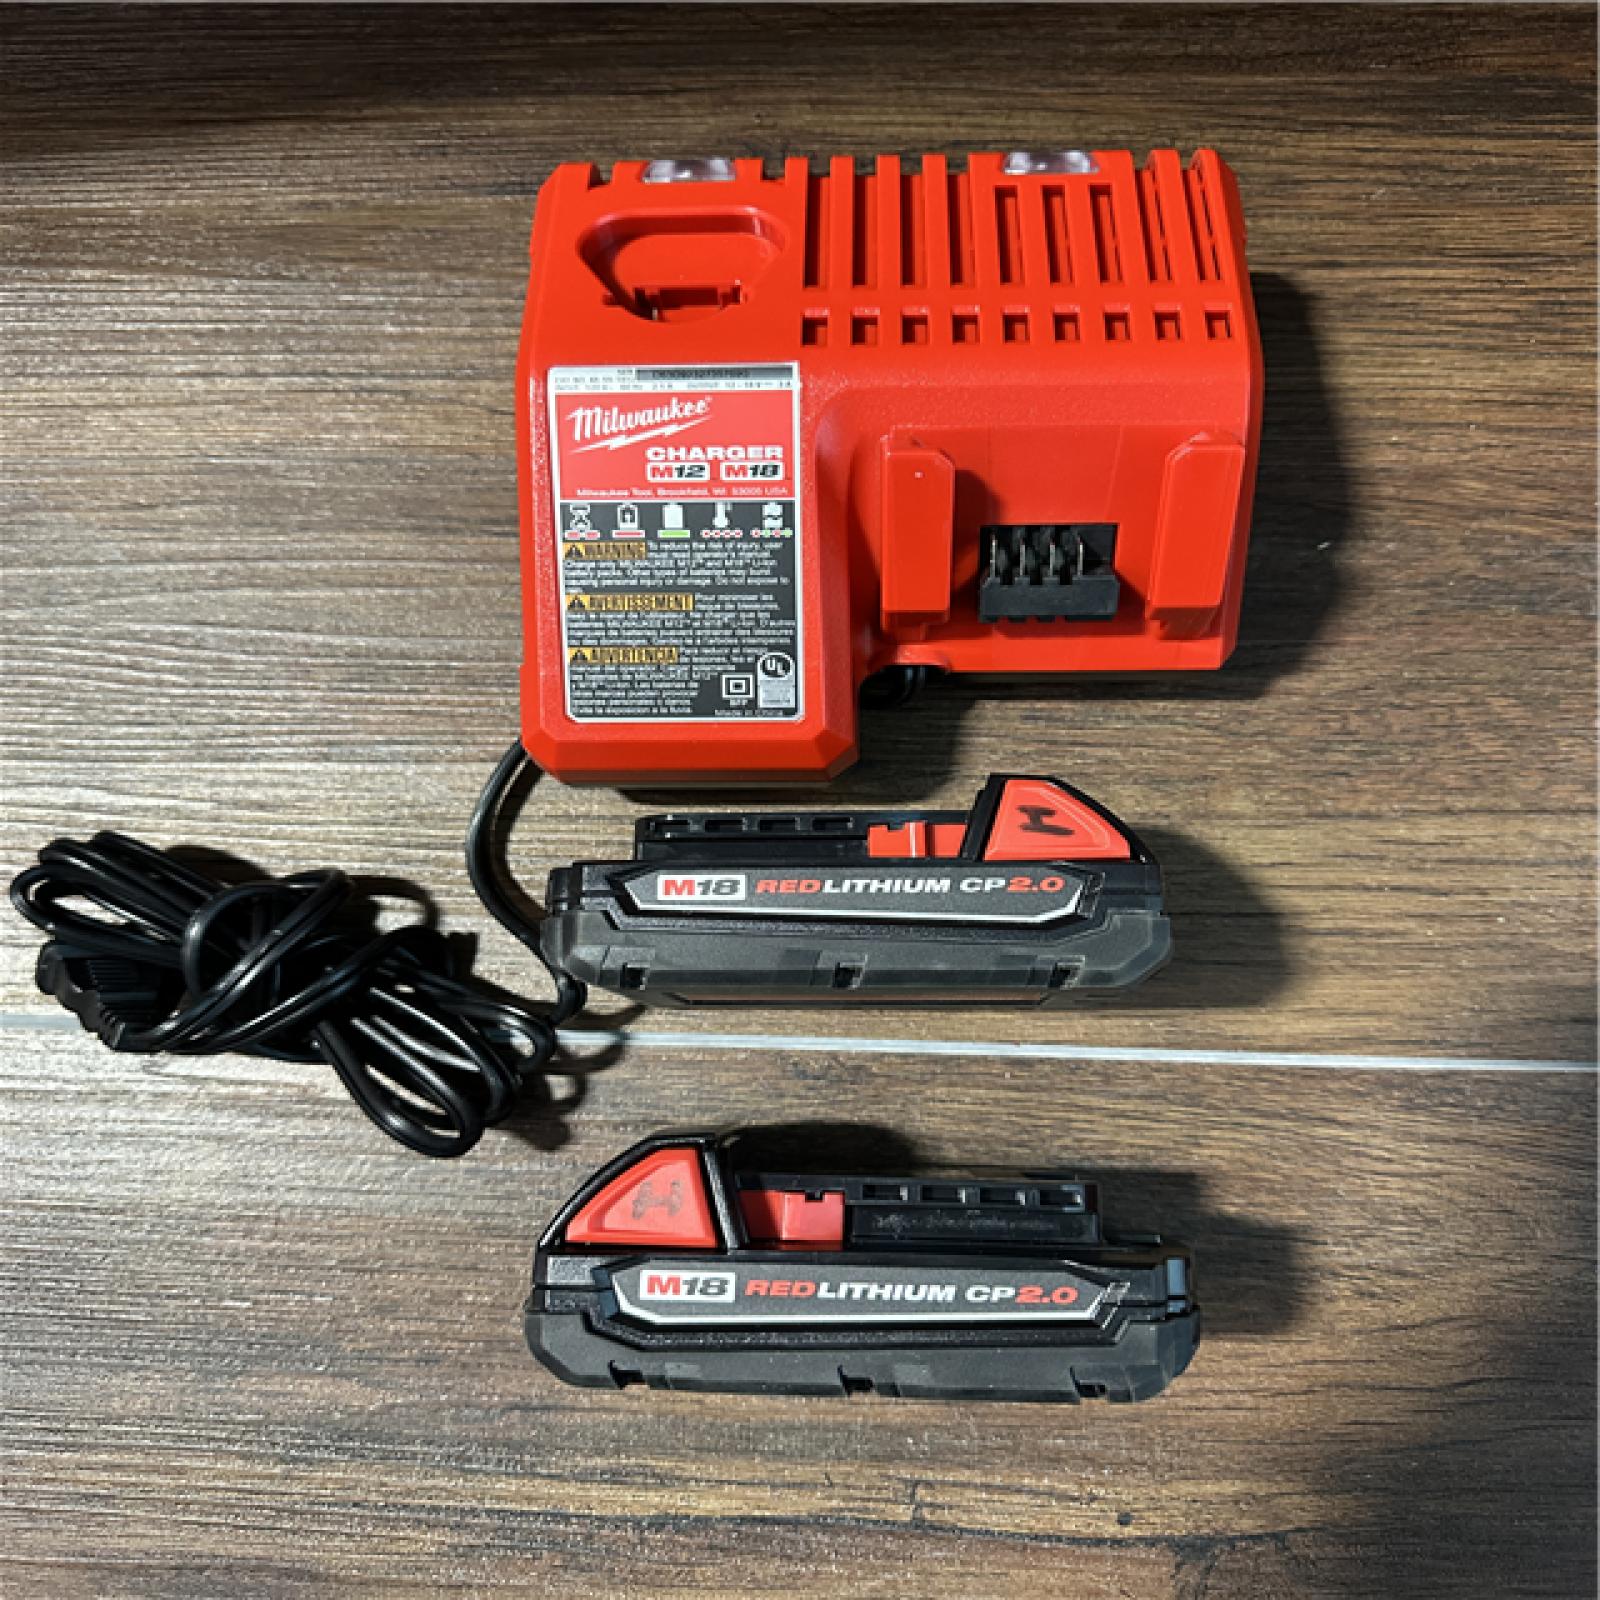 California AS-IS Milwaukee M18 Short Throw Press Tool Kit W/Pex Crimp Jaws, (2) Batteries, Charger & Hard Case